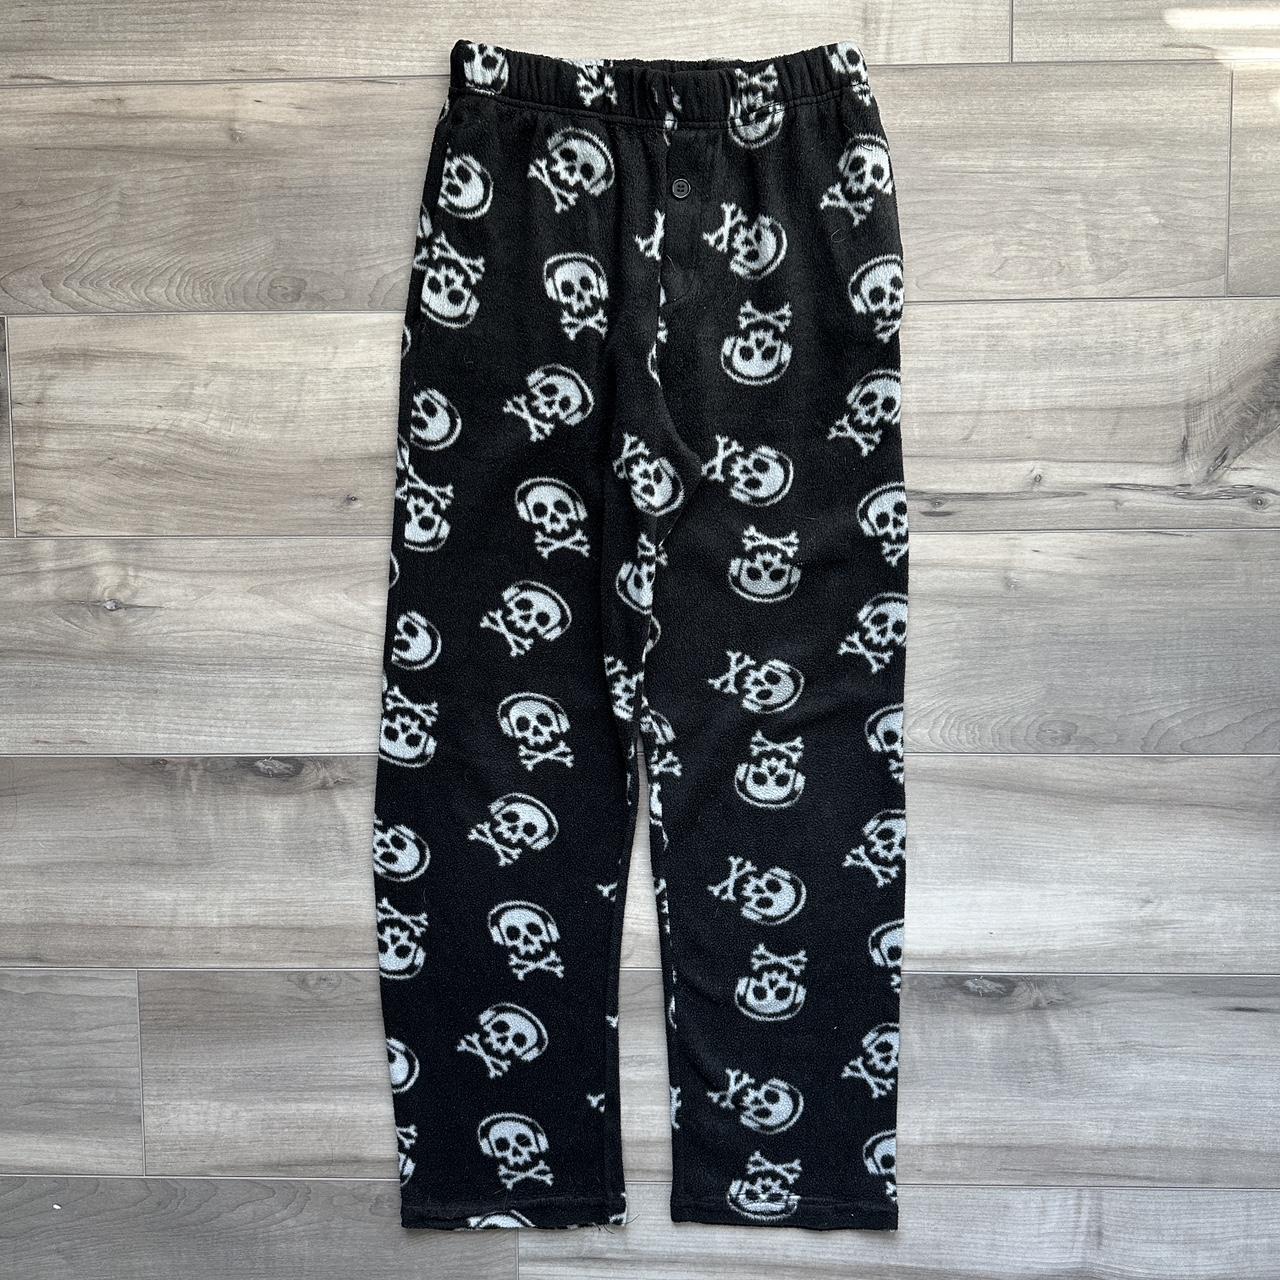 Y2K Goth Skull Pajama Pants I have another pair of... - Depop